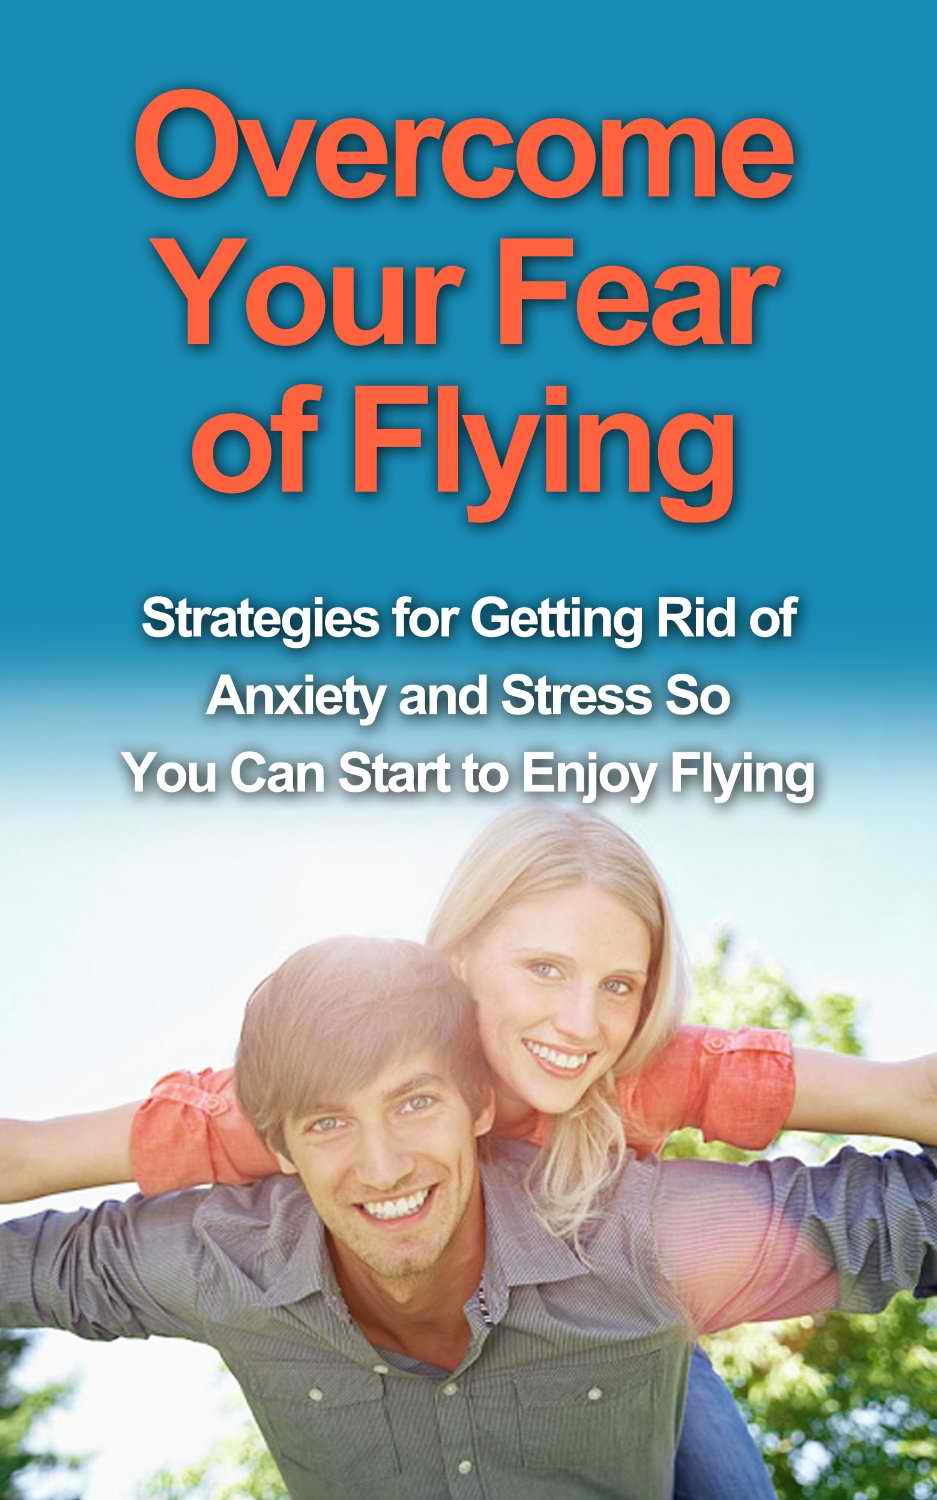 Overcome Your Fear of Flying: Strategies for Getting Rid of Anxiety and Stress So You Can Start to Enjoy Flying by Donelle Hargrave